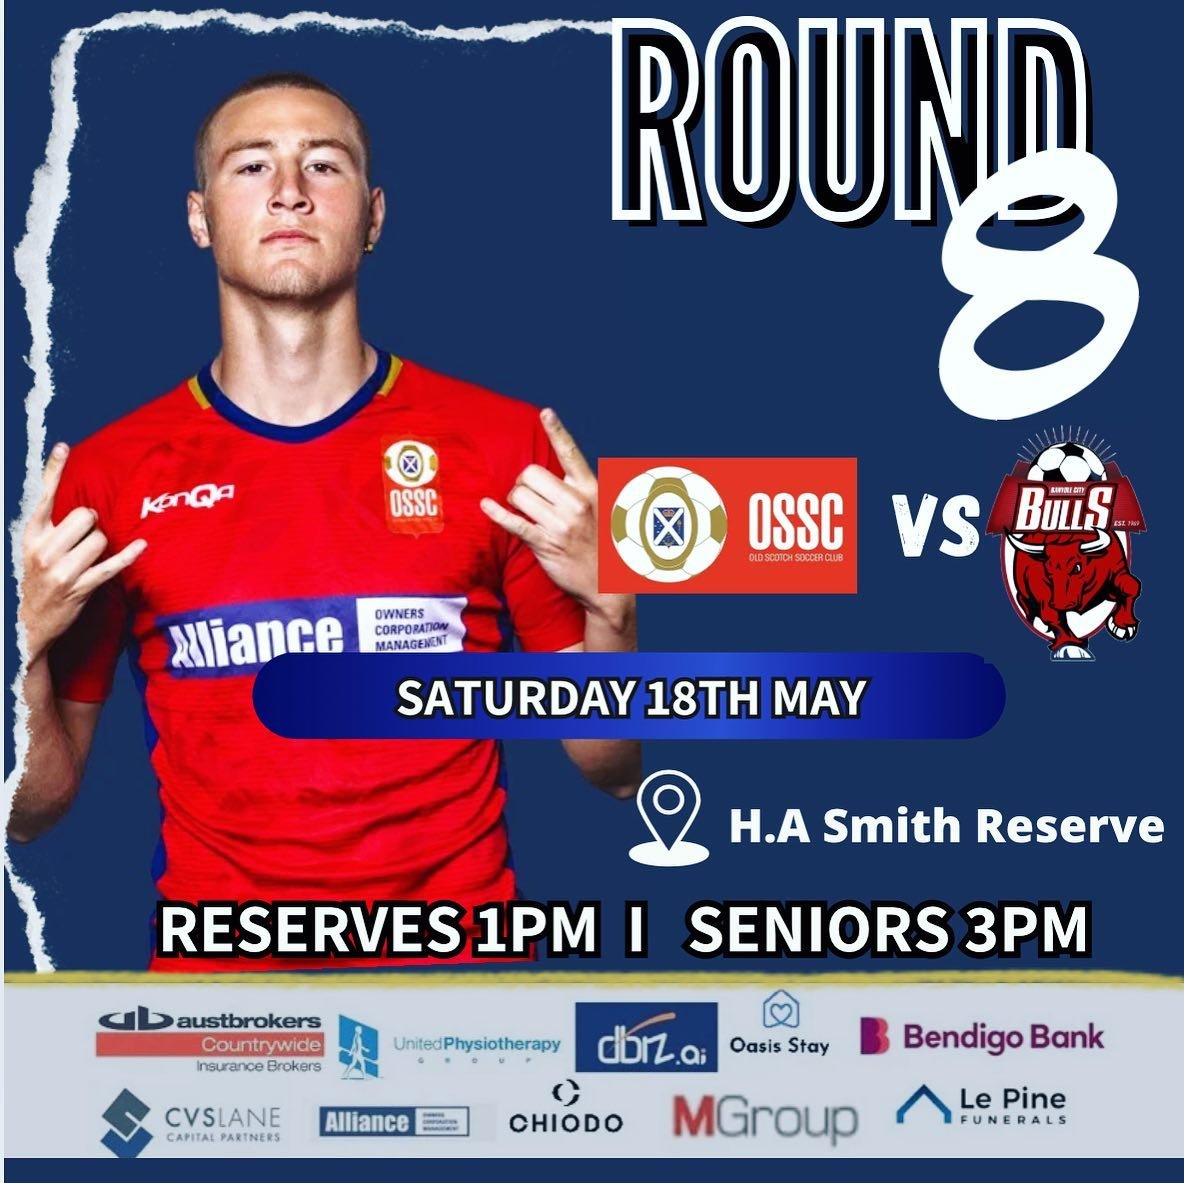 BACK HOME! 

Come support the teams as we take on Banyule. 

#ossc